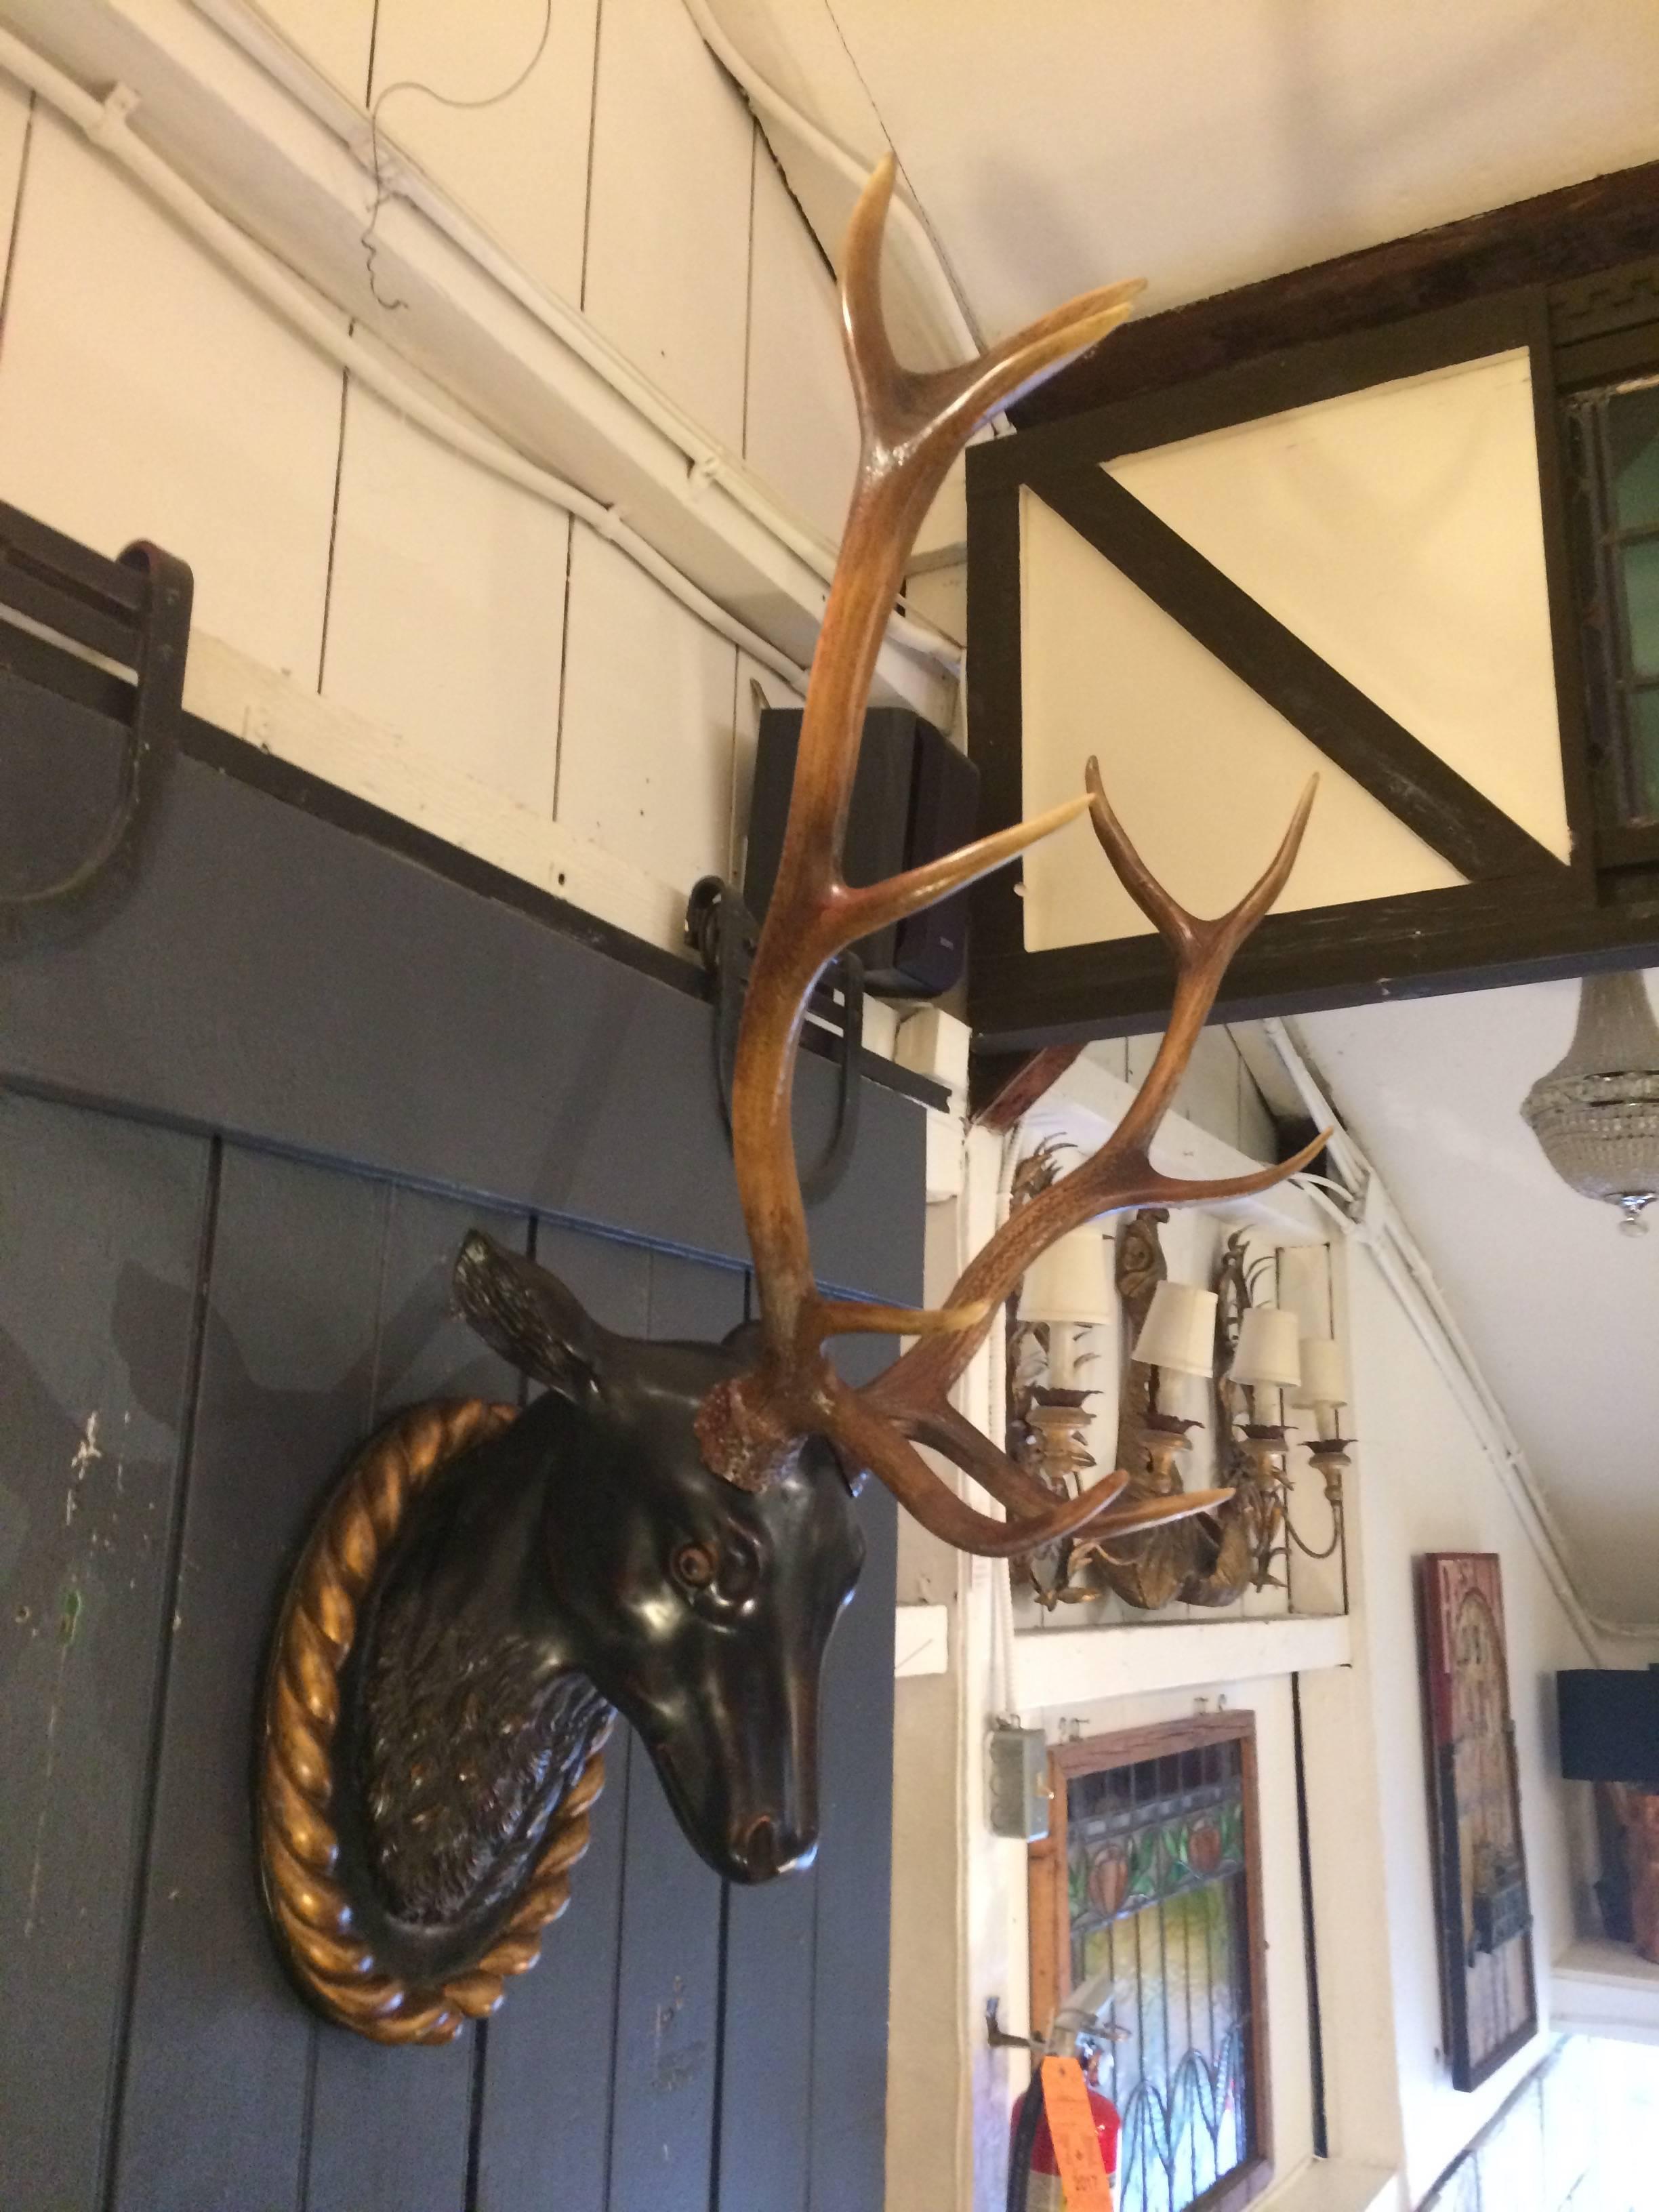 Wood Stunning & Impressive Faux Stag Head with Long Antlers Wall Mounted Sculpture